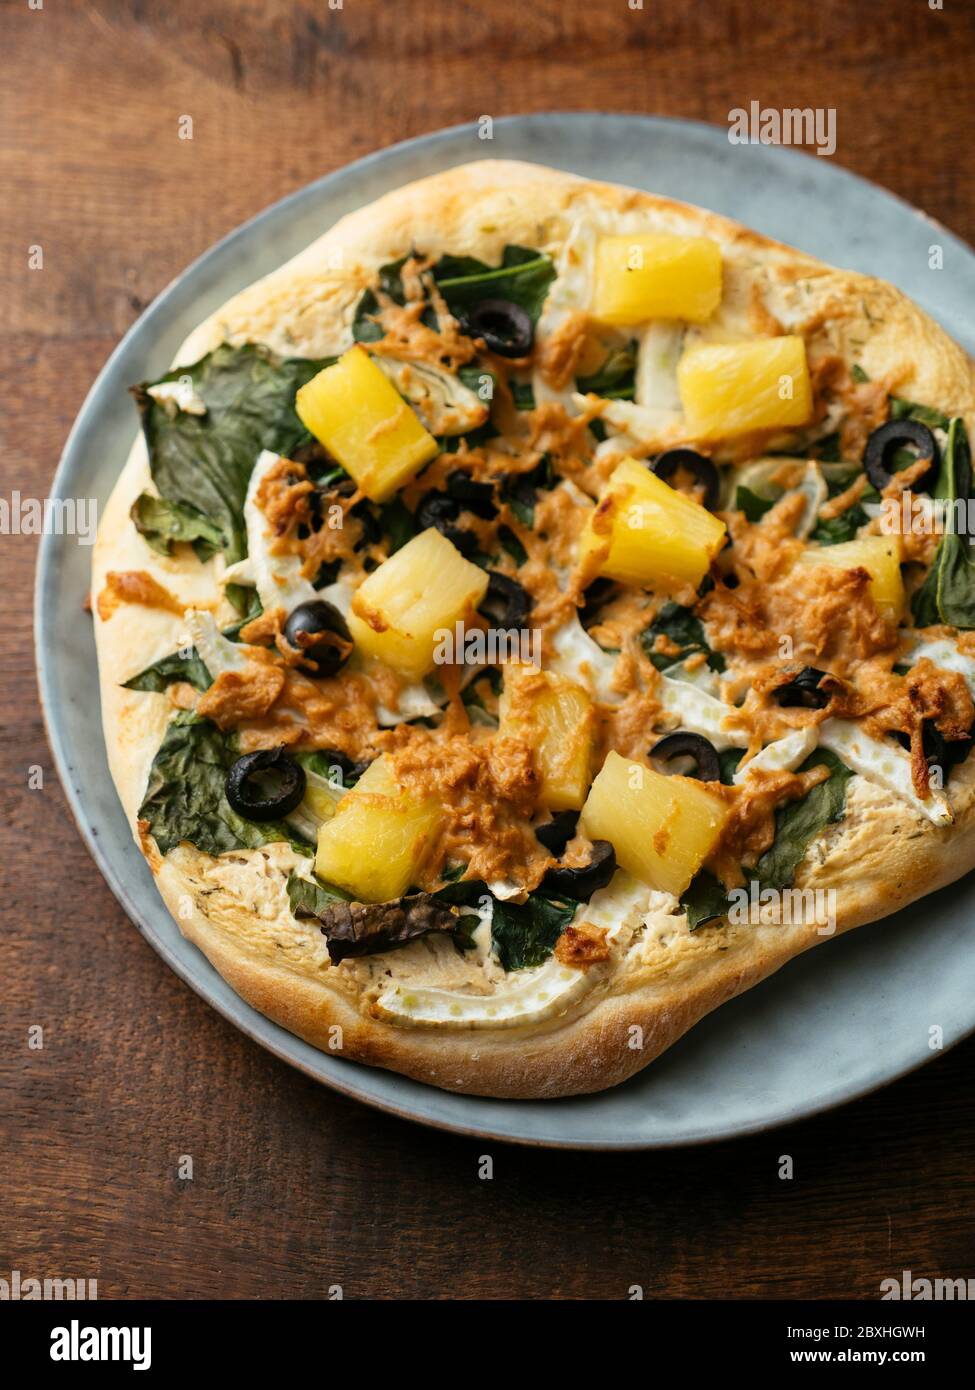 Home made vegan Siberian kale pizza with pineapple and fennel. Stock Photo